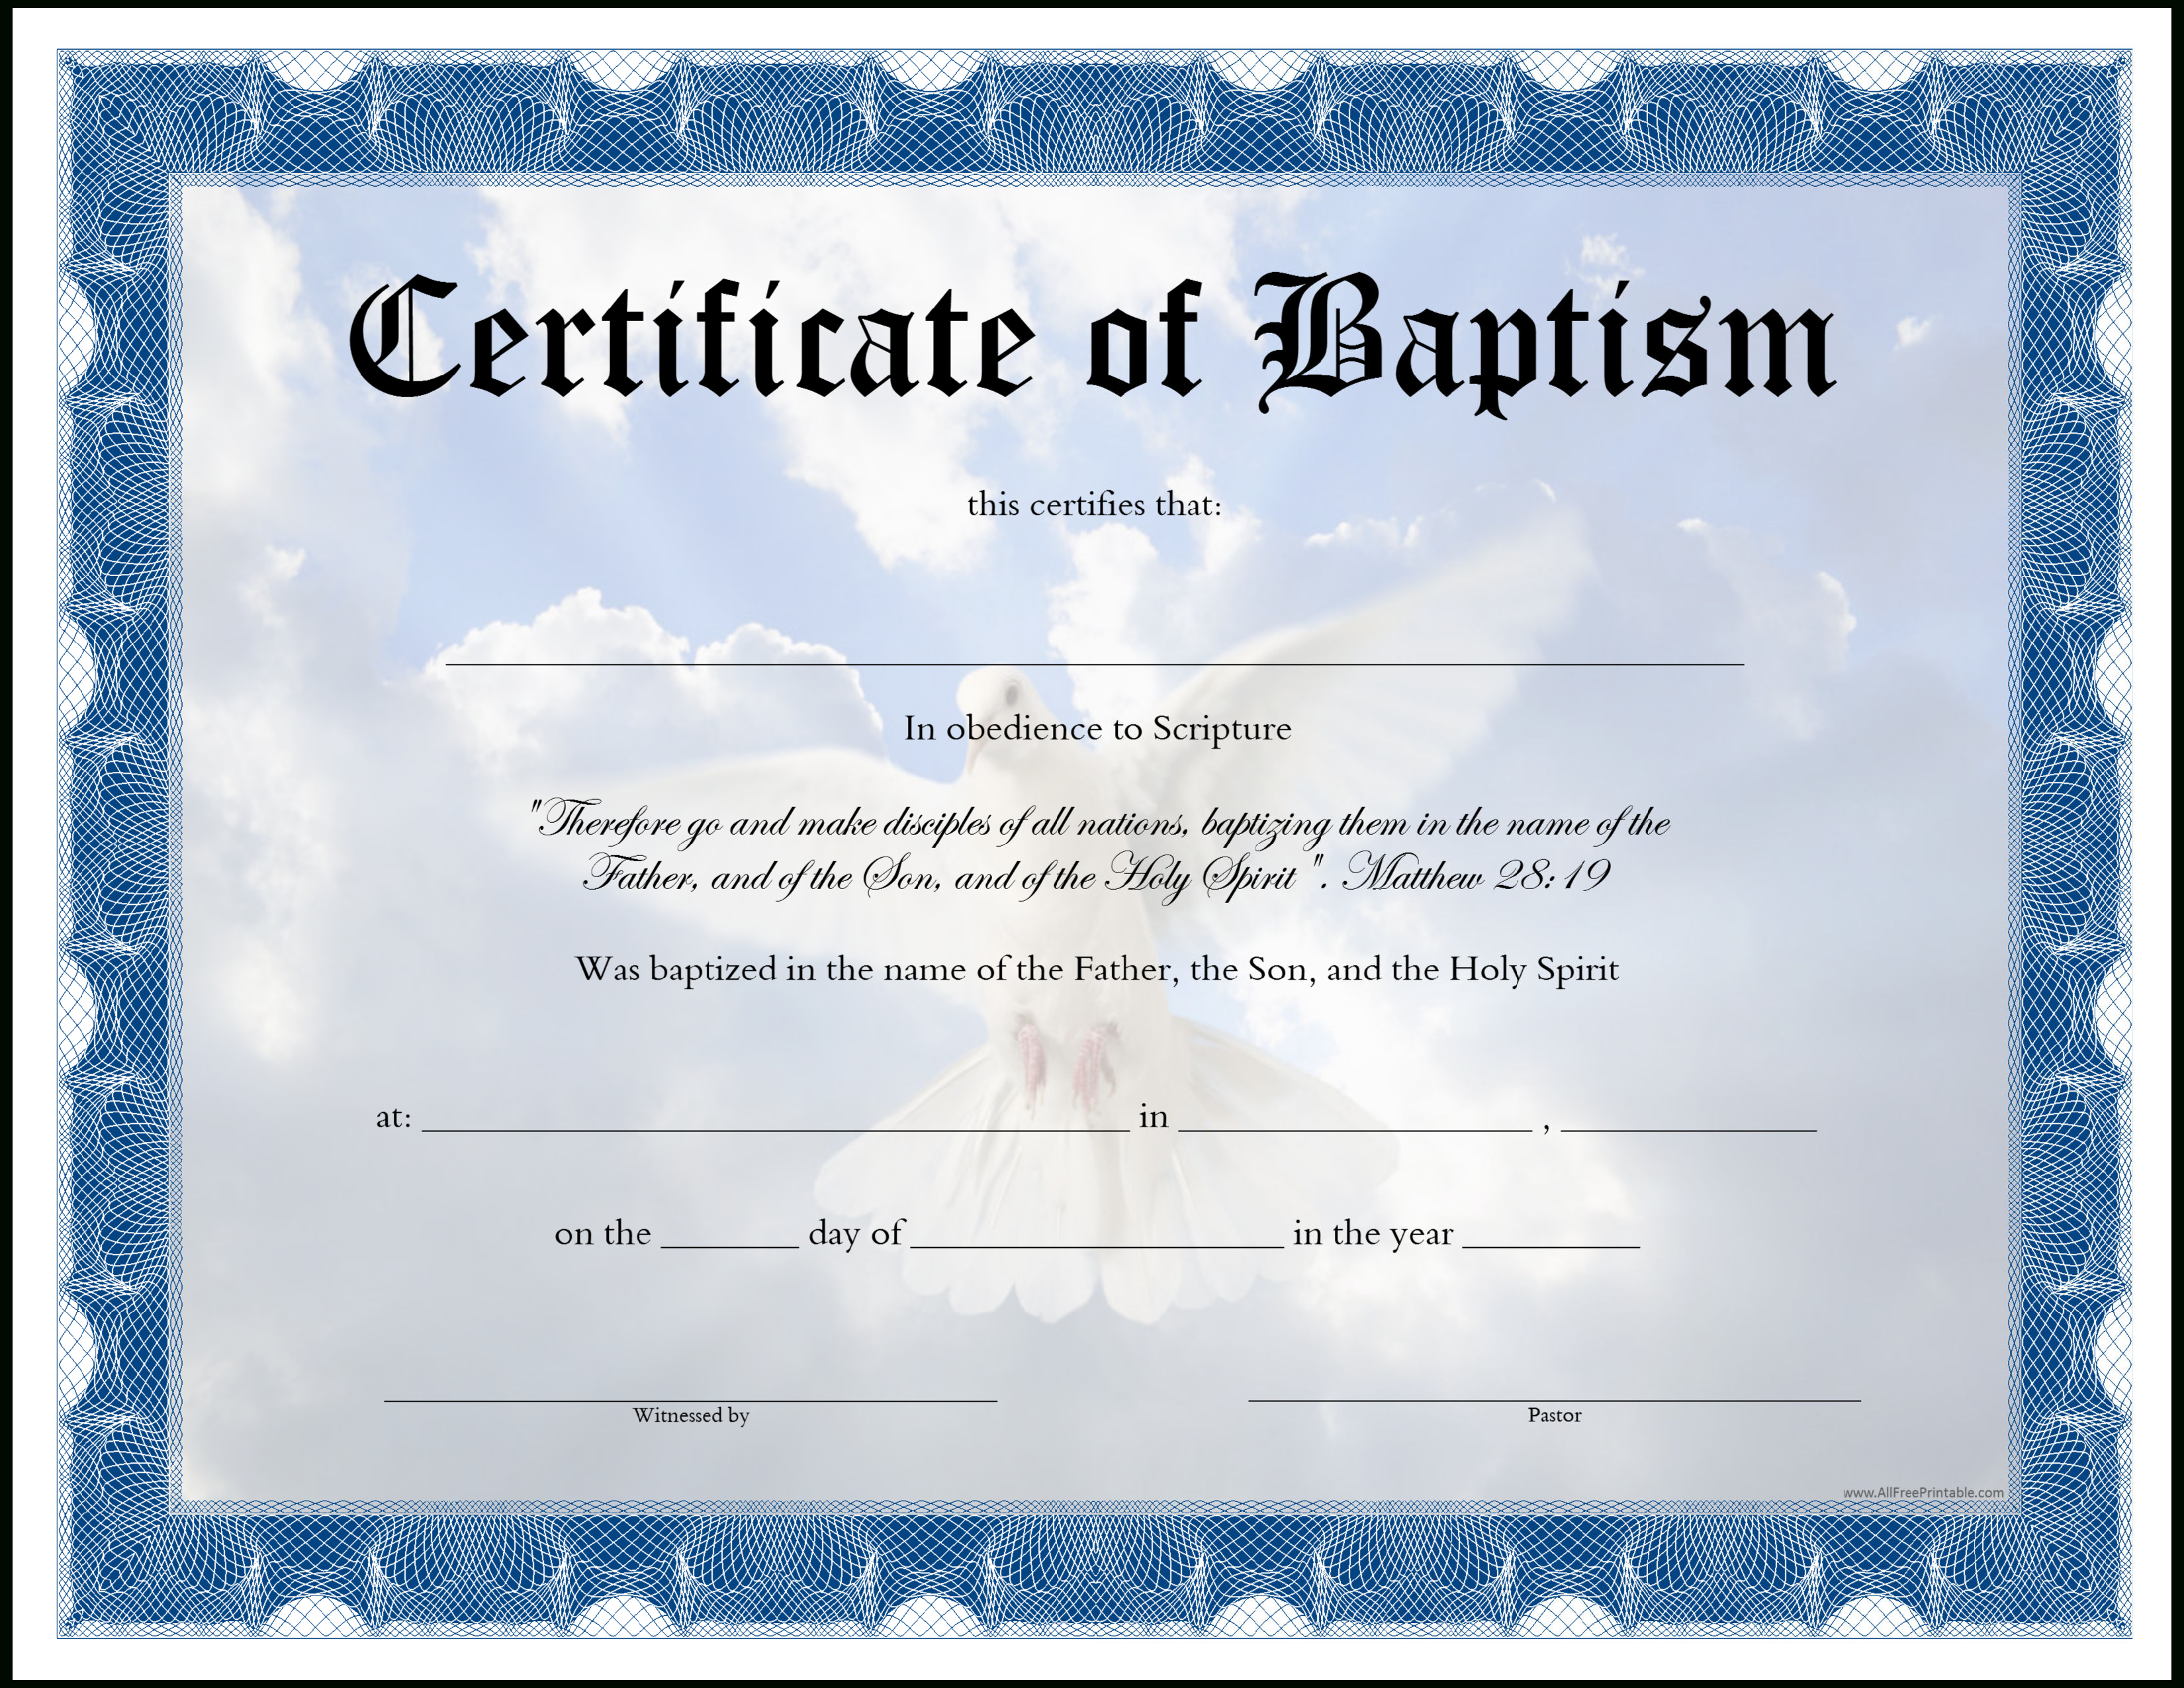 Baptism Certificate - How To Craft An Appealing Baptism Certificate - Free Printable Baptism Certificate